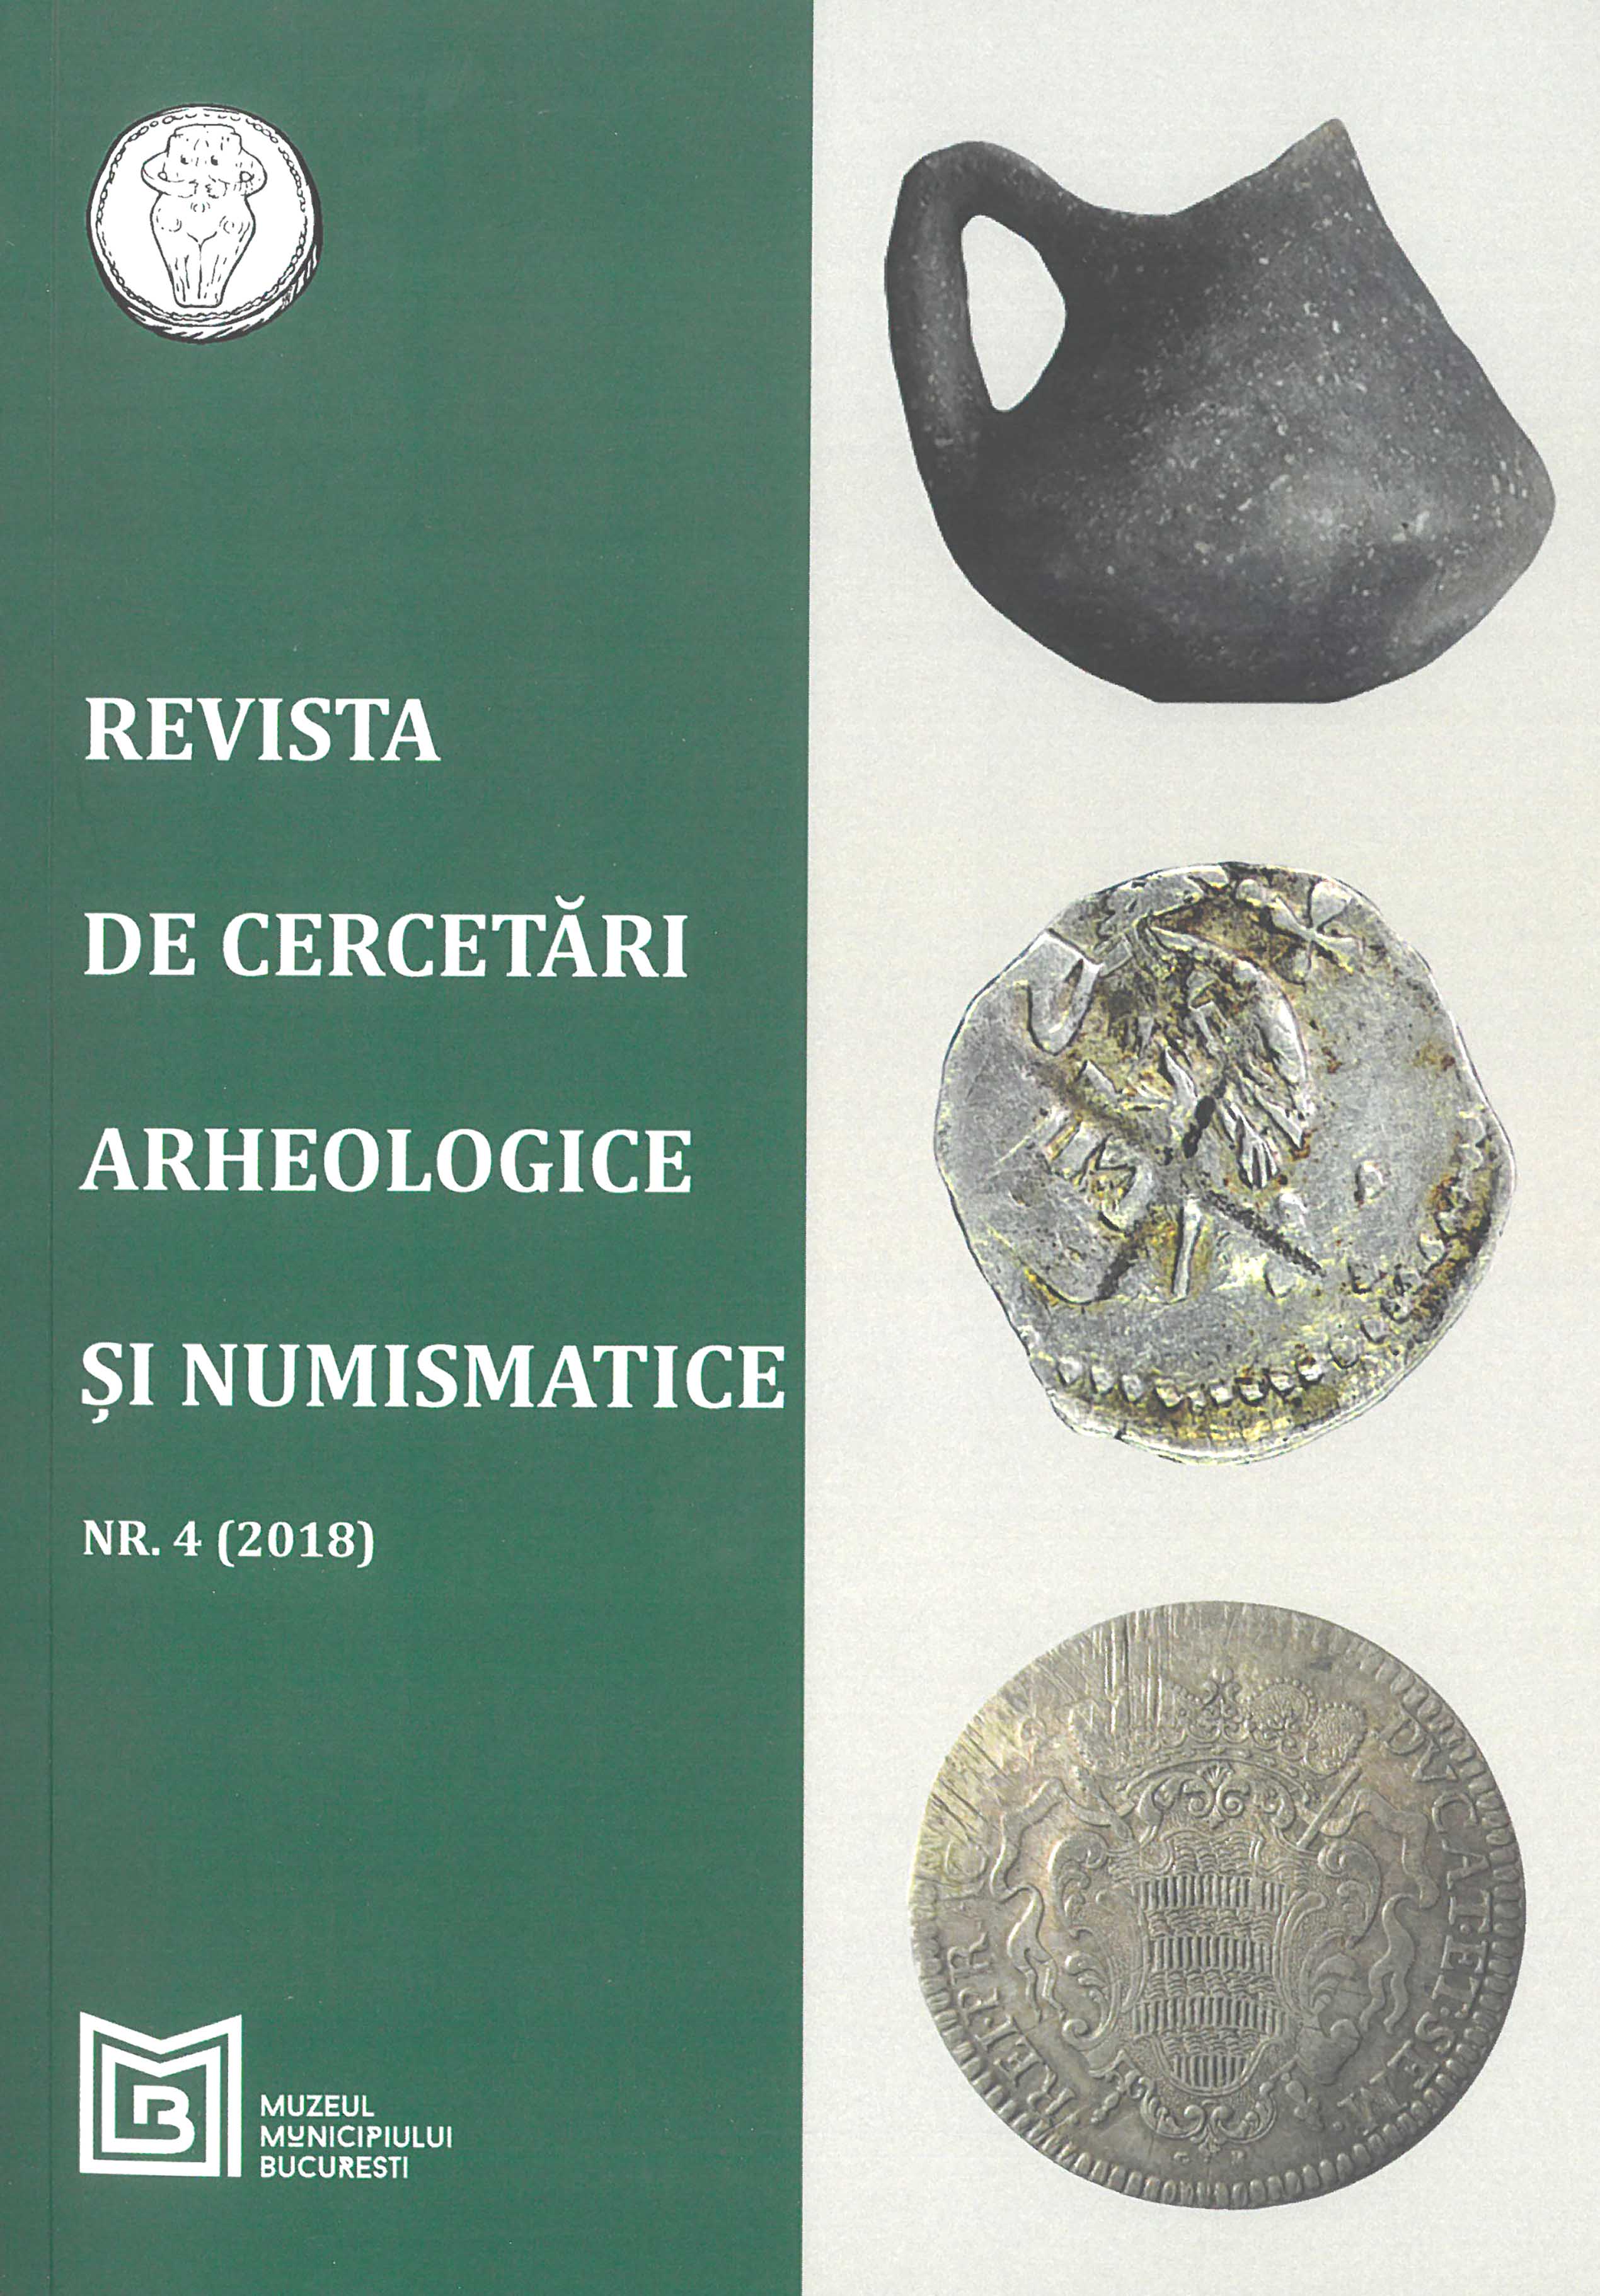 REGARDING A RARE ISTRIAN BRONZE ISSUE FROM THE 2ND CENTURY BC